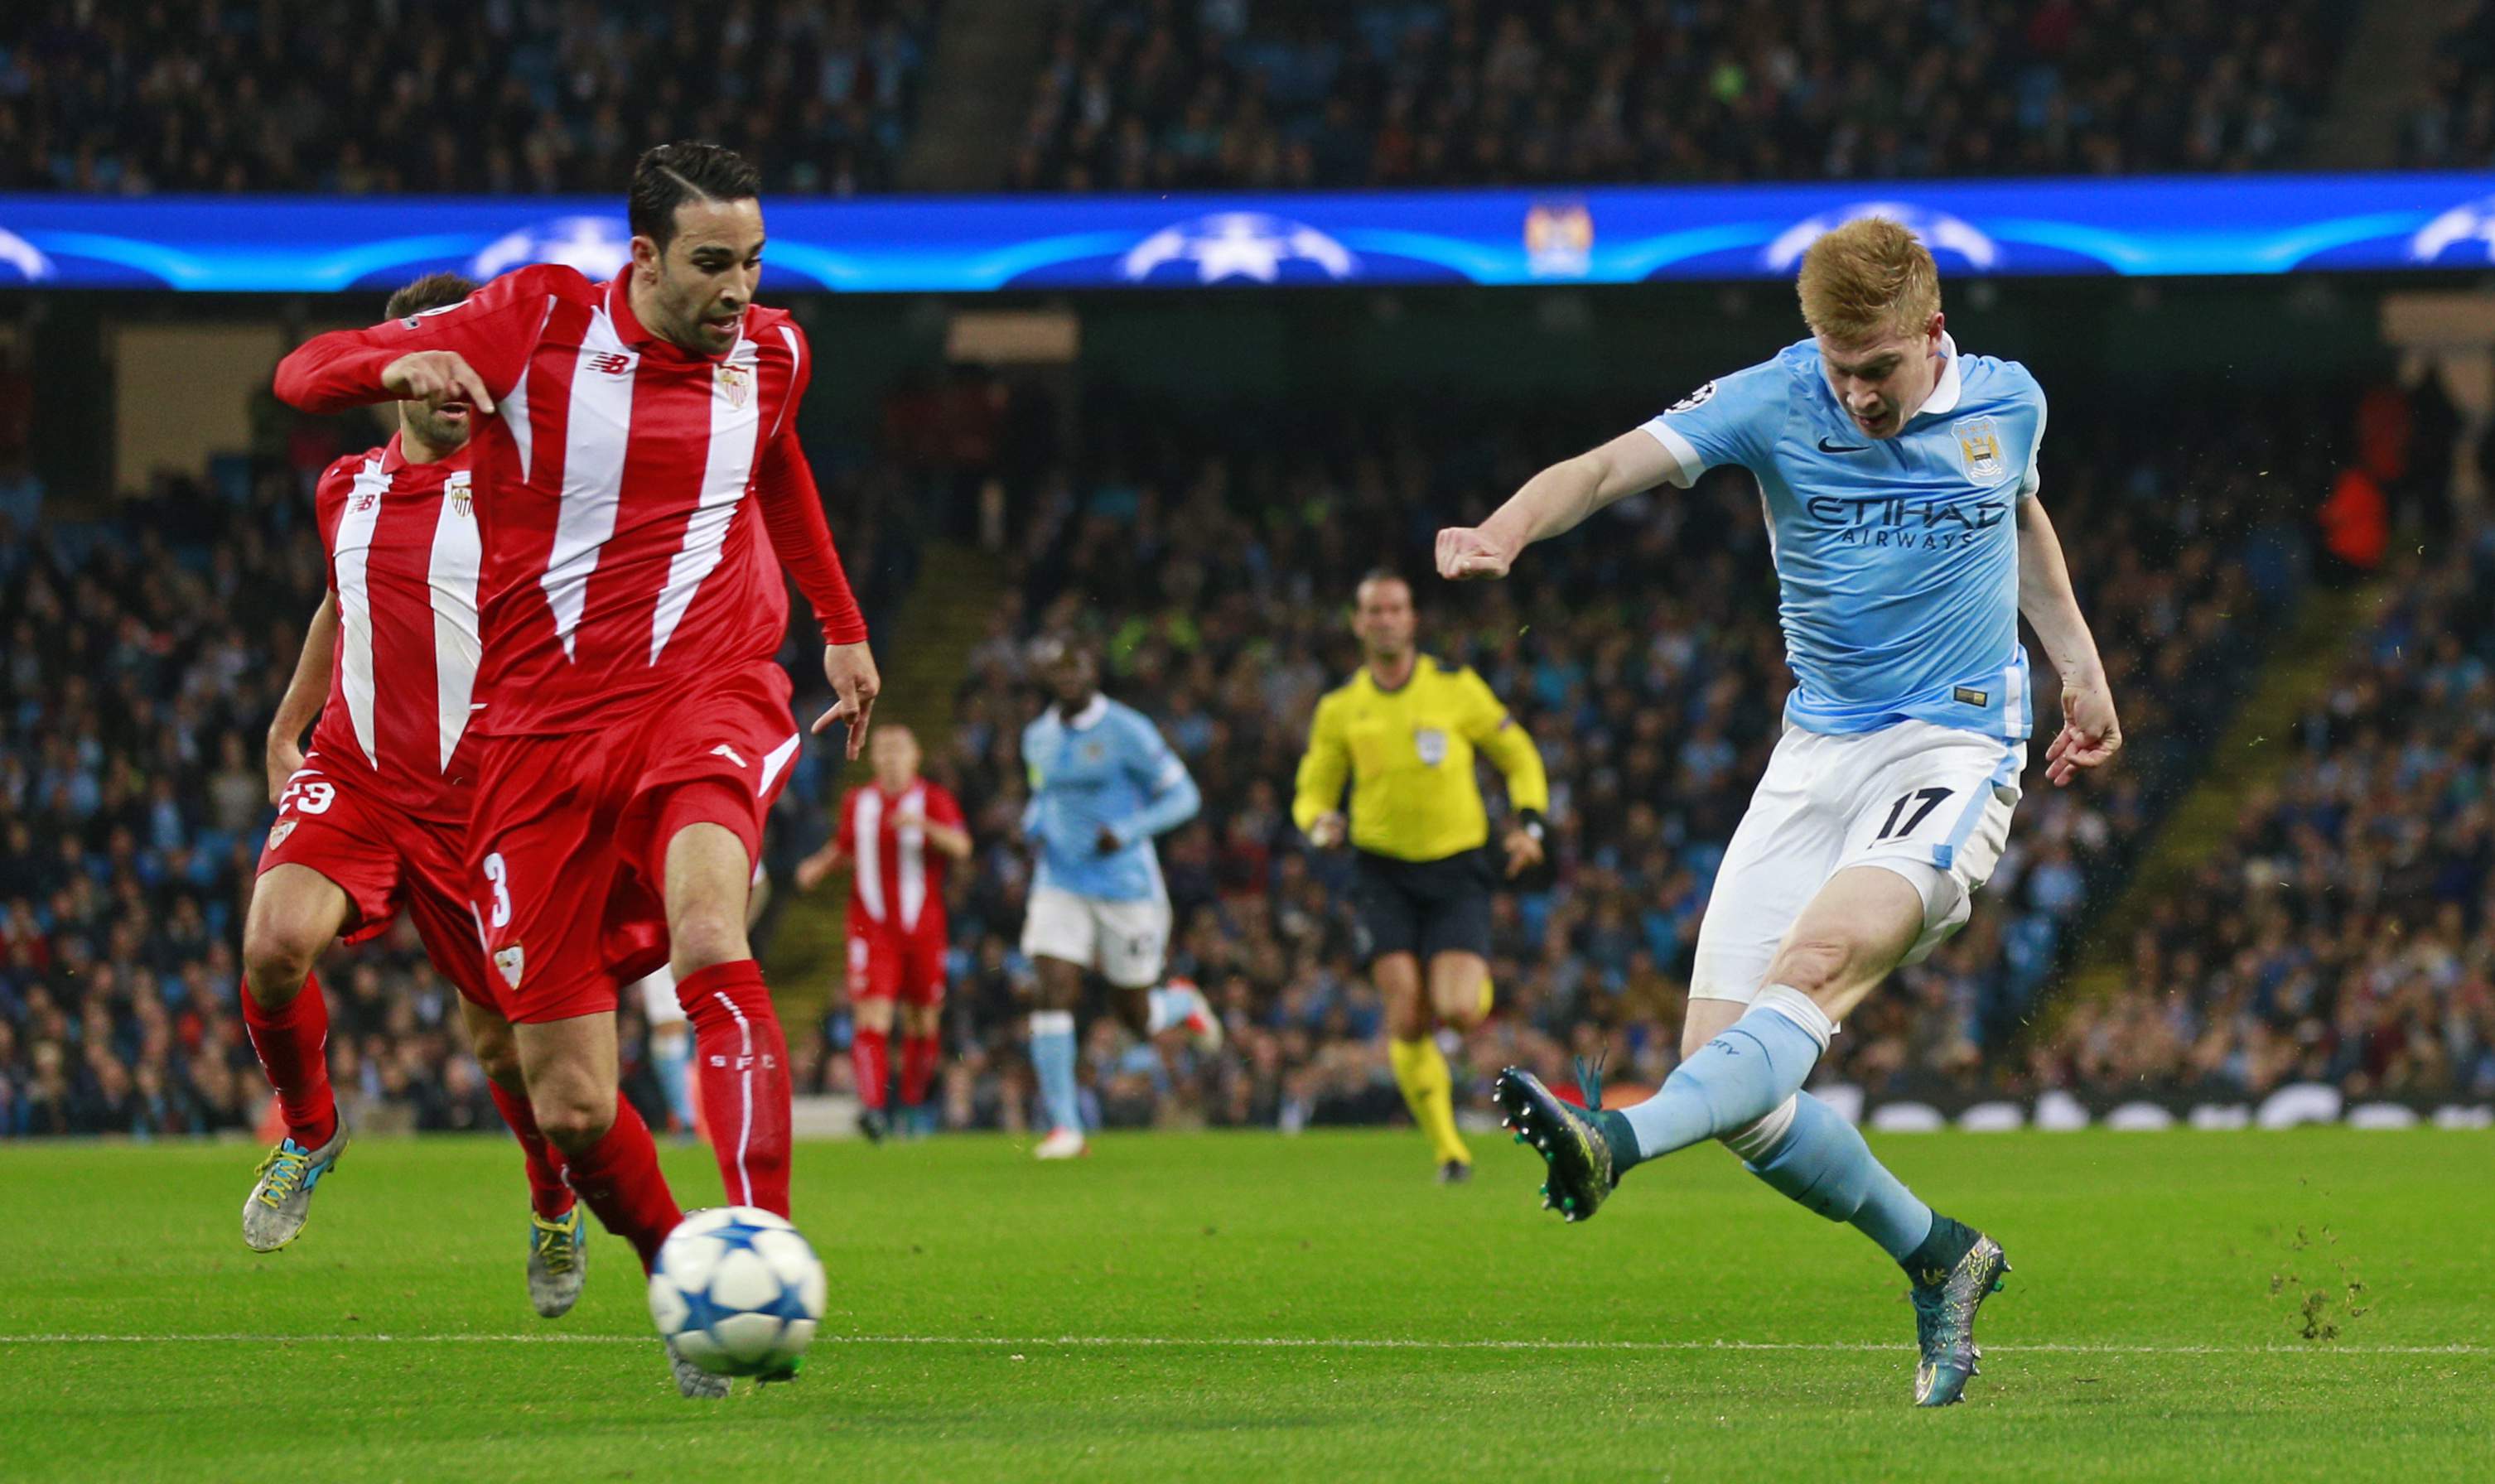 Football - Manchester City v Sevilla - UEFA Champions League Group Stage - Group D - Etihad Stadium, Manchester, England - 21/10/15 Manchester City's Kevin De Bruyne in action with Sevilla's Adil Rami Action Images via Reuters / Jason Cairnduff Livepic EDITORIAL USE ONLY.